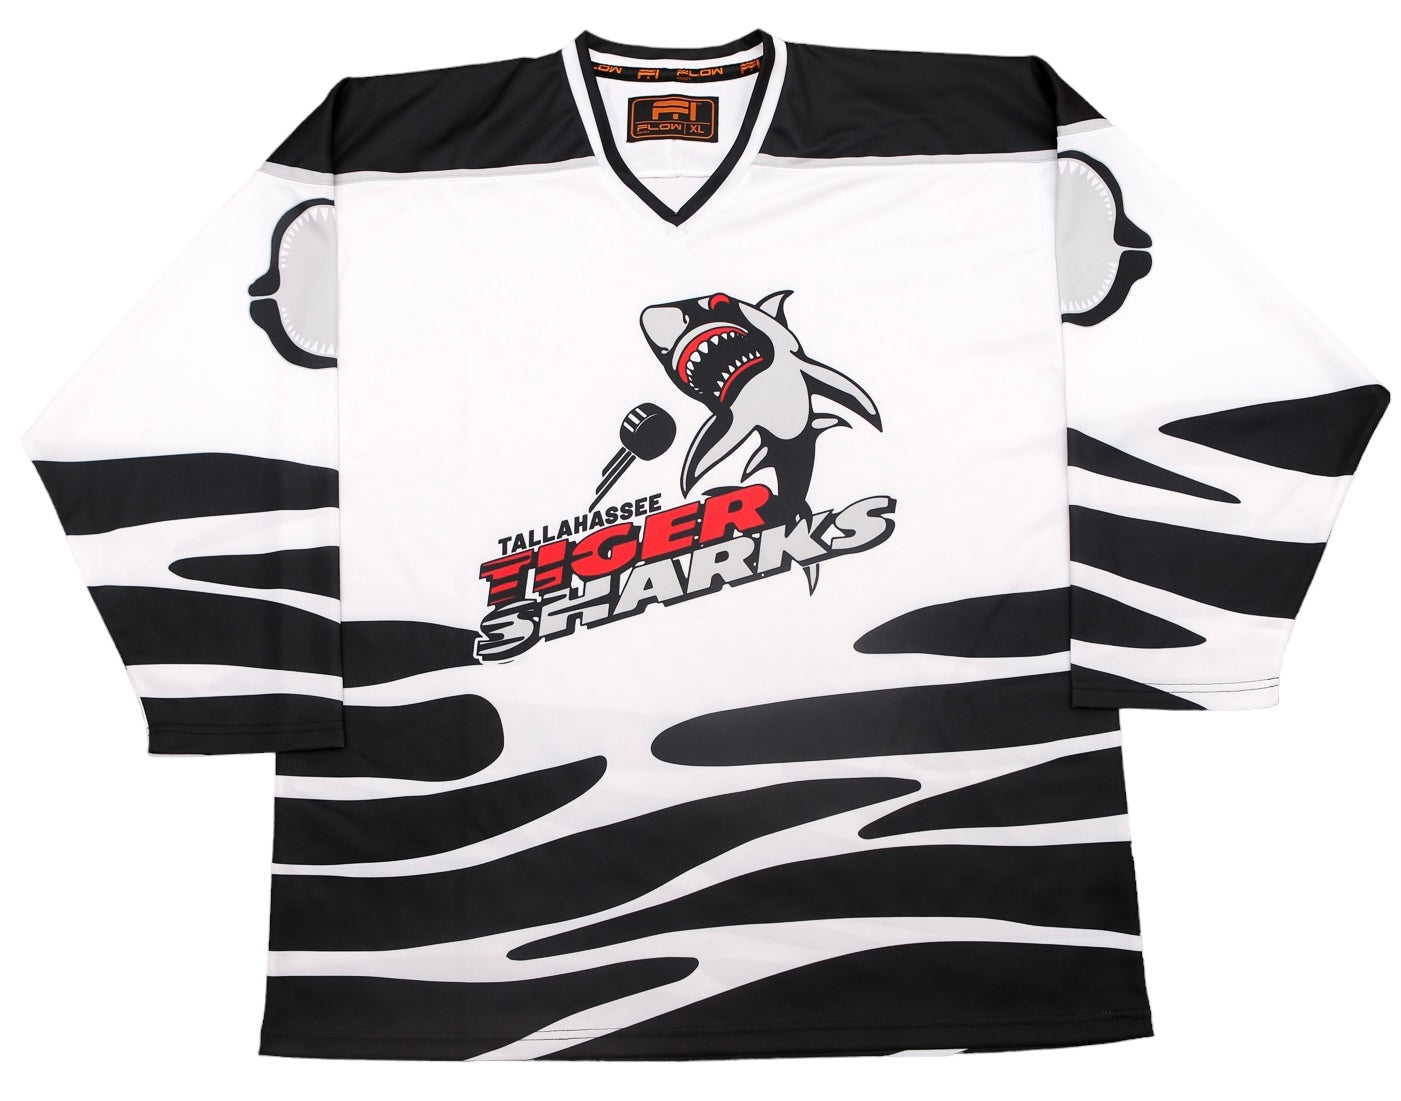 Las Vegas Aces Jersey and Logo Concept : r/hockey